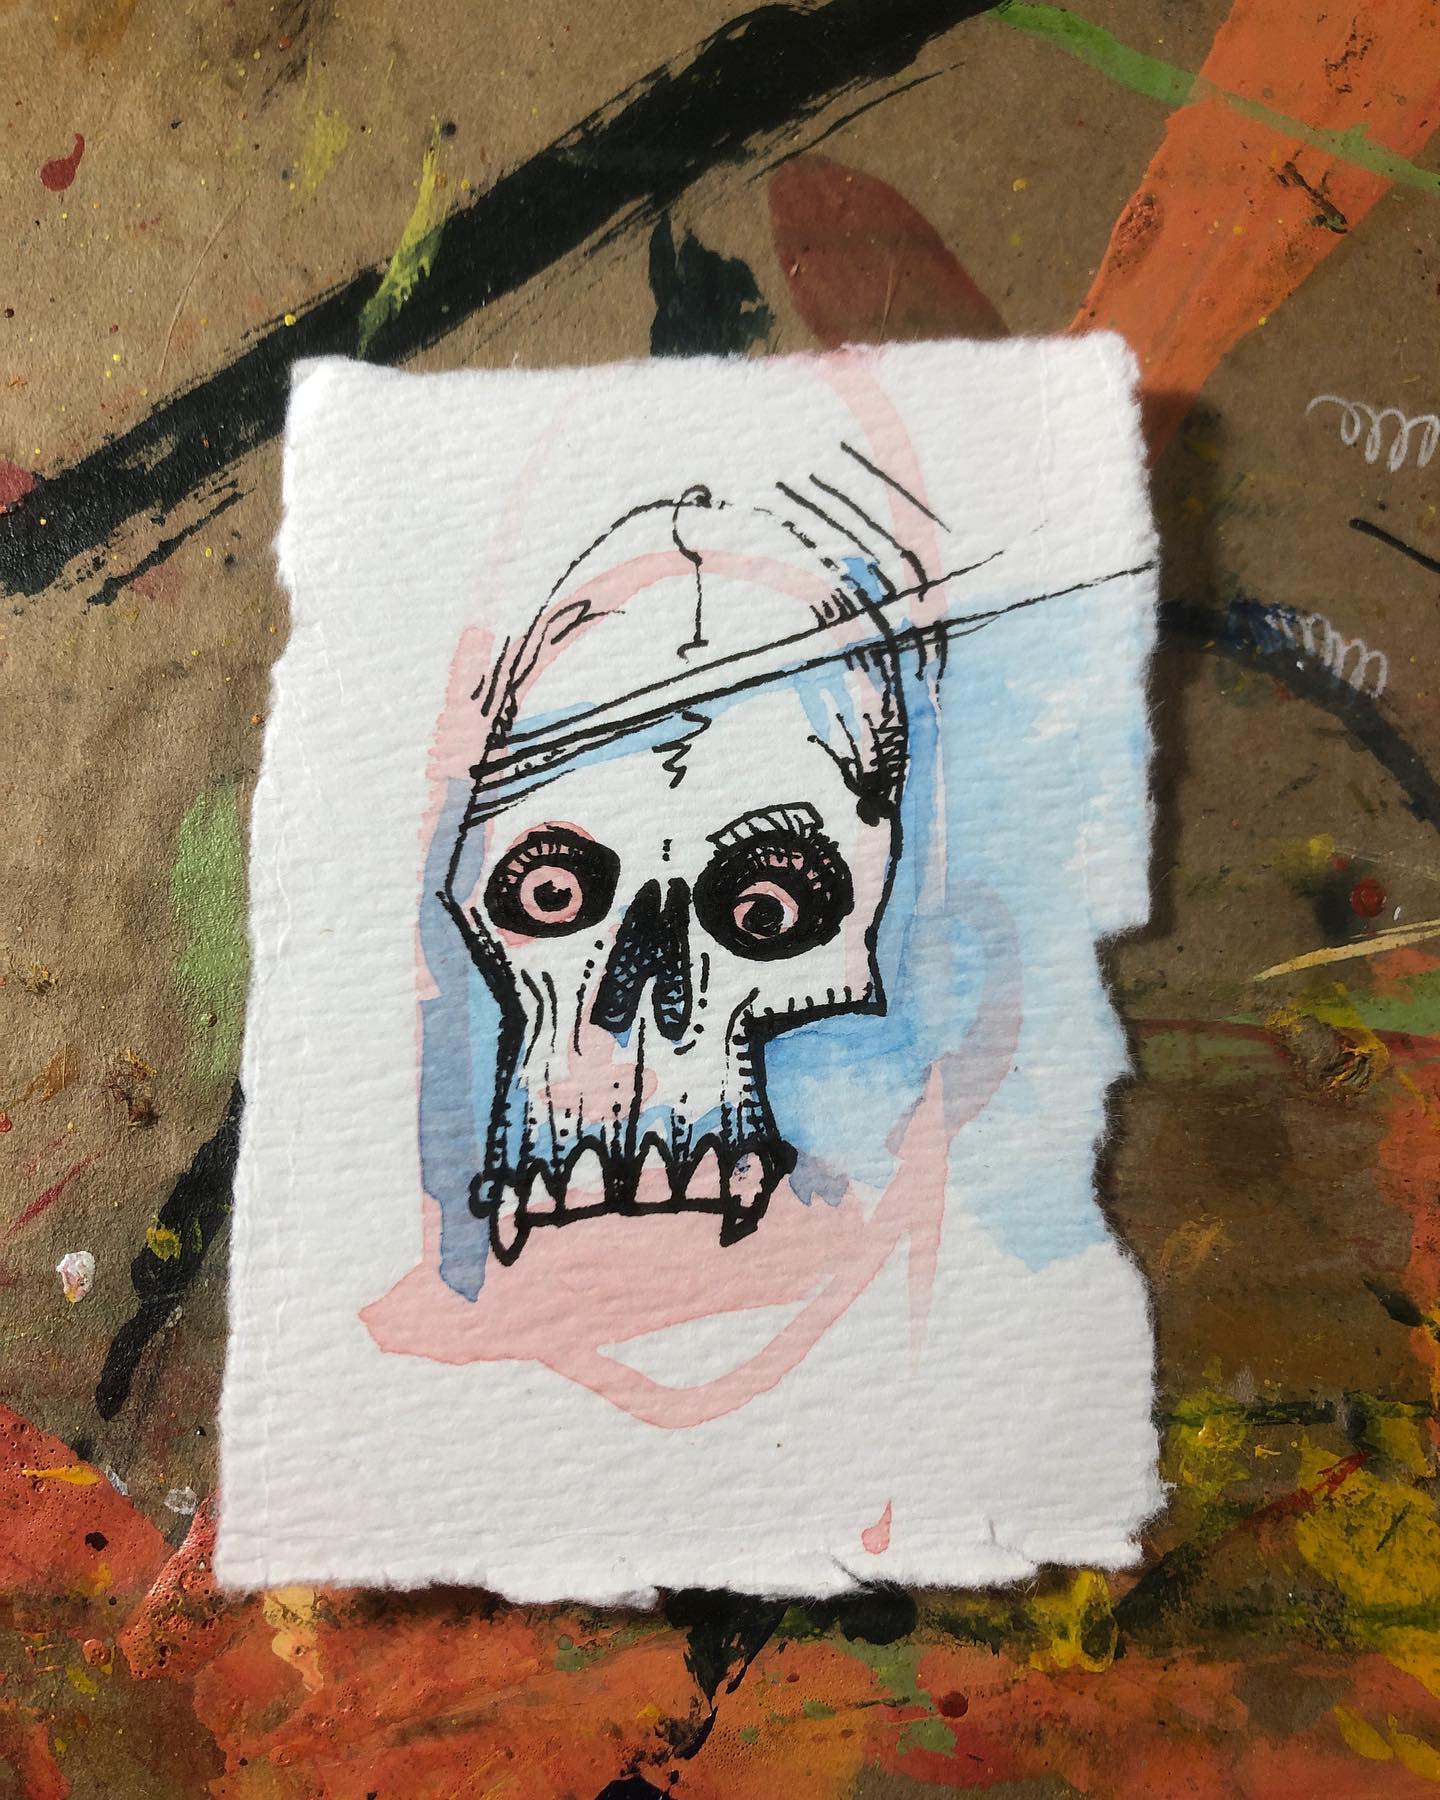 Ink drawing of a skull with blue/pink watercolor accents